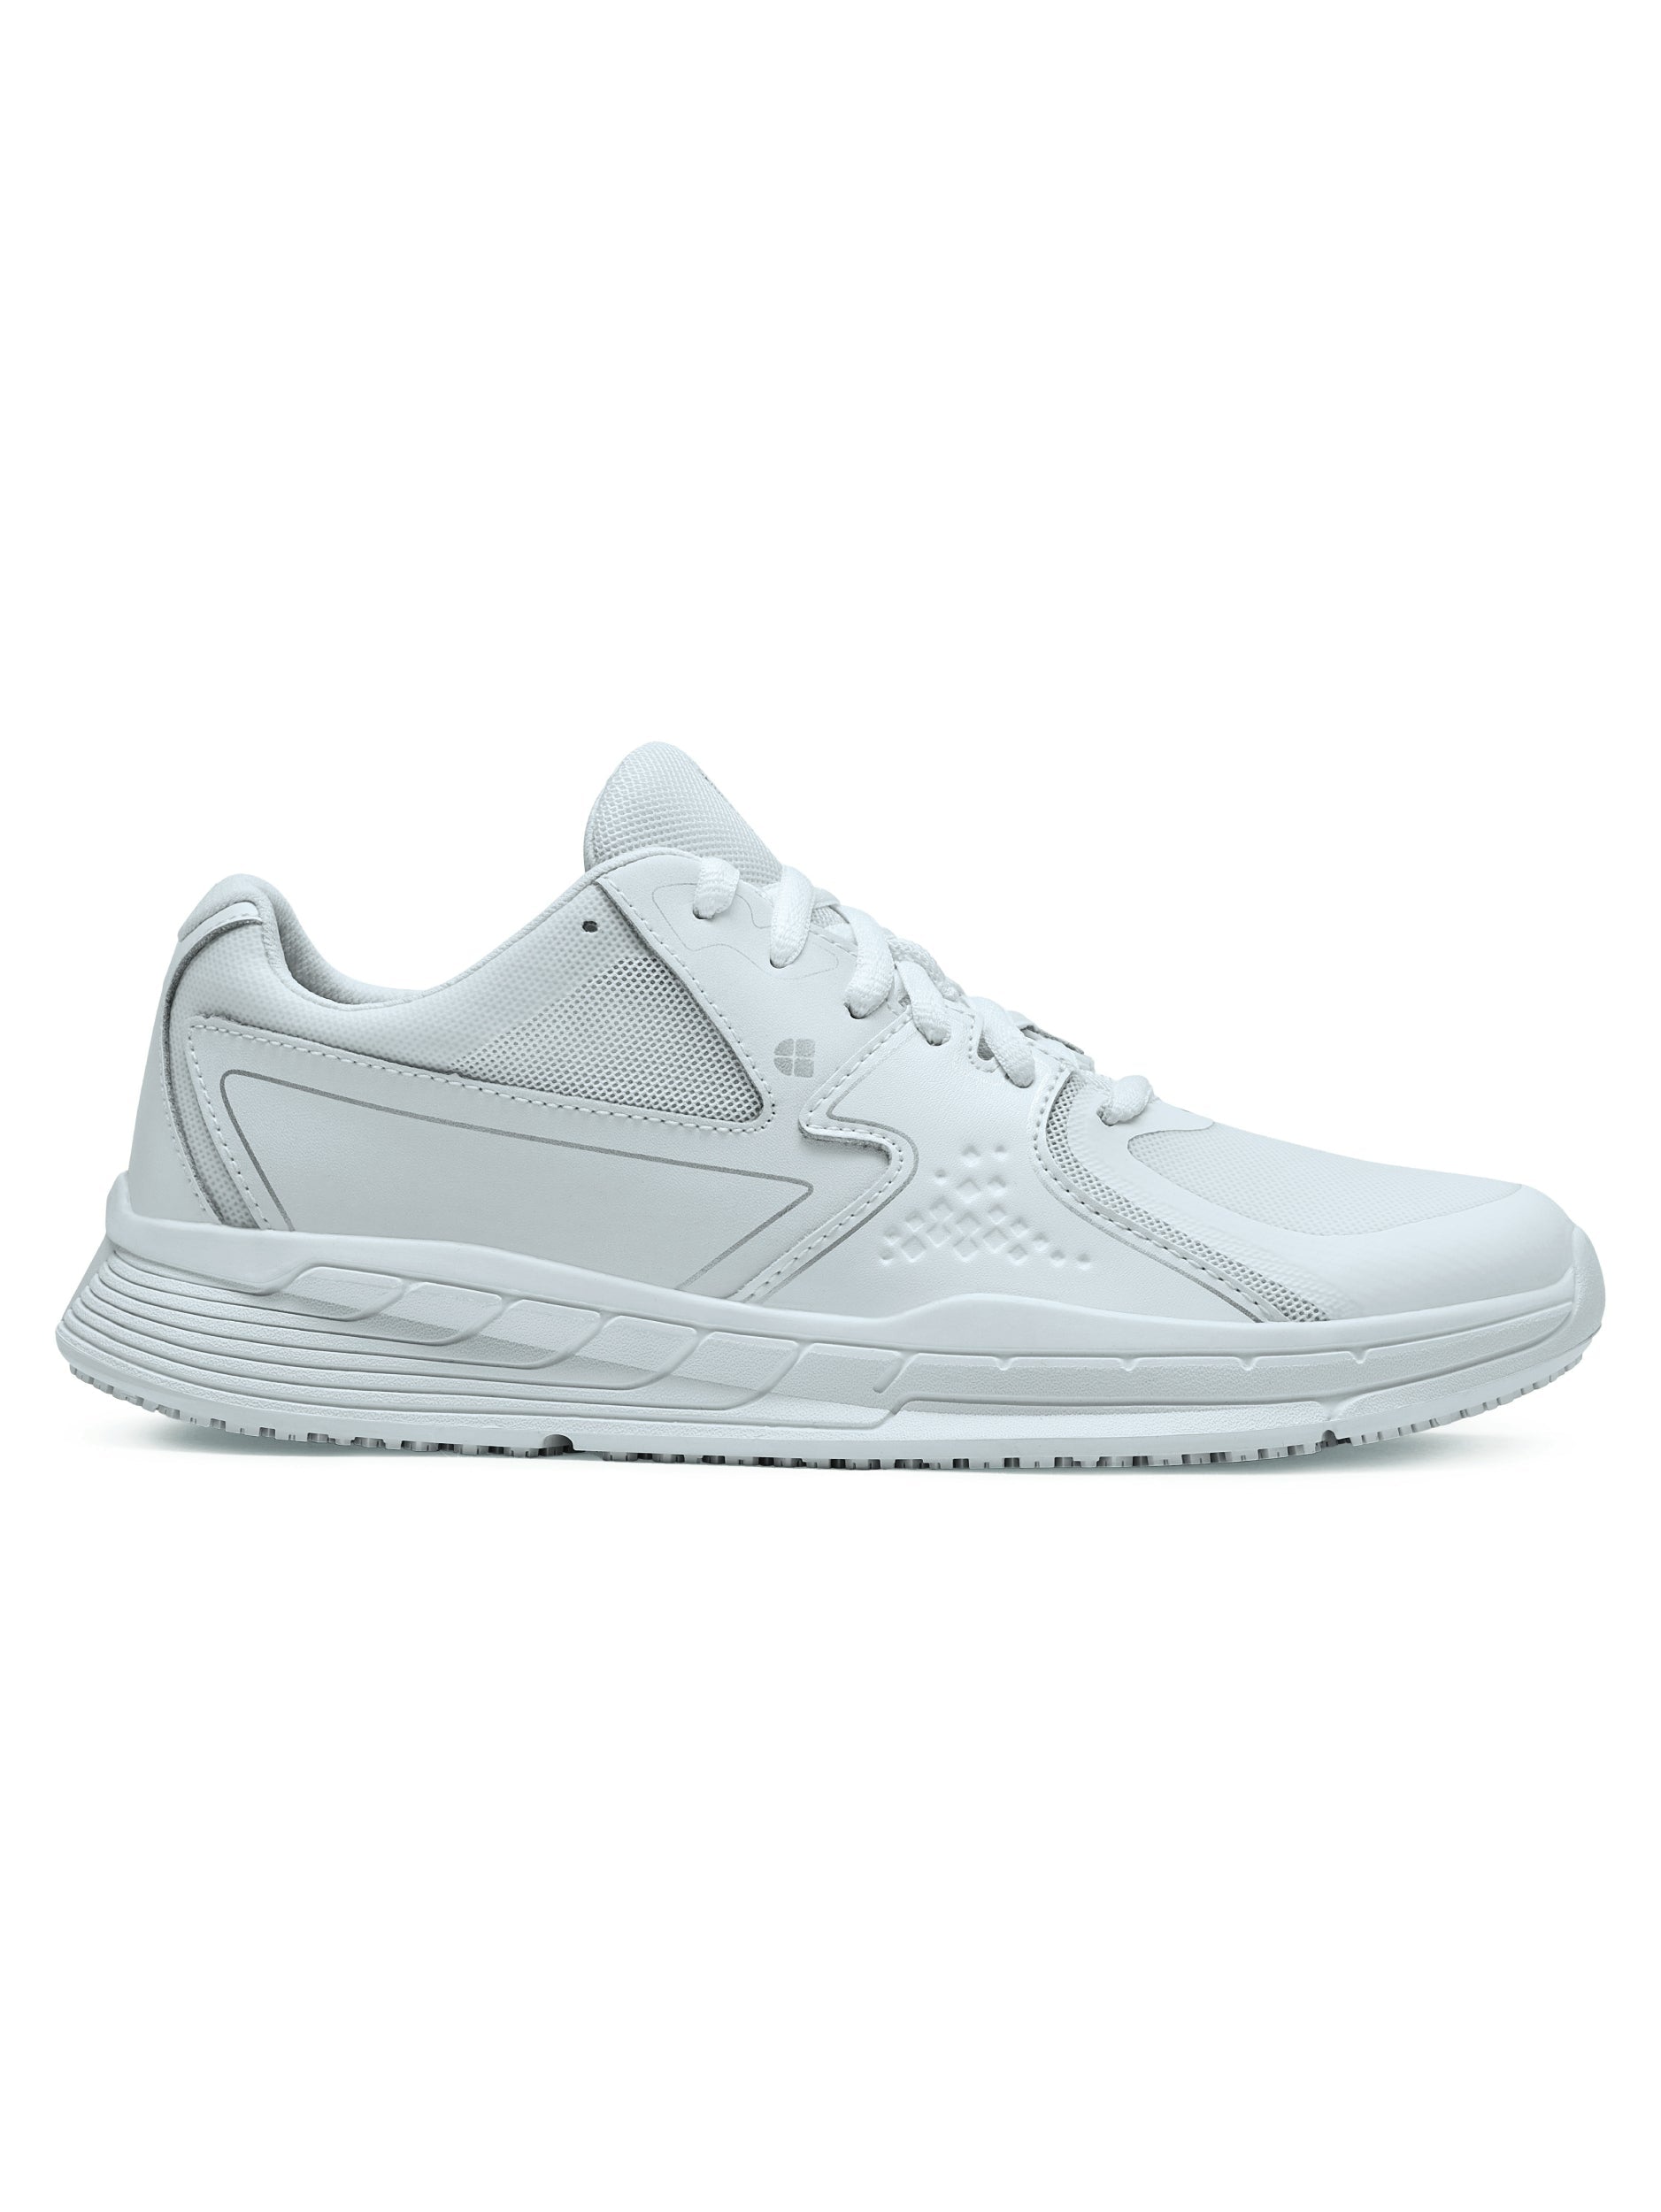 Men's Work Shoe Condor White by  Shoes For Crews.